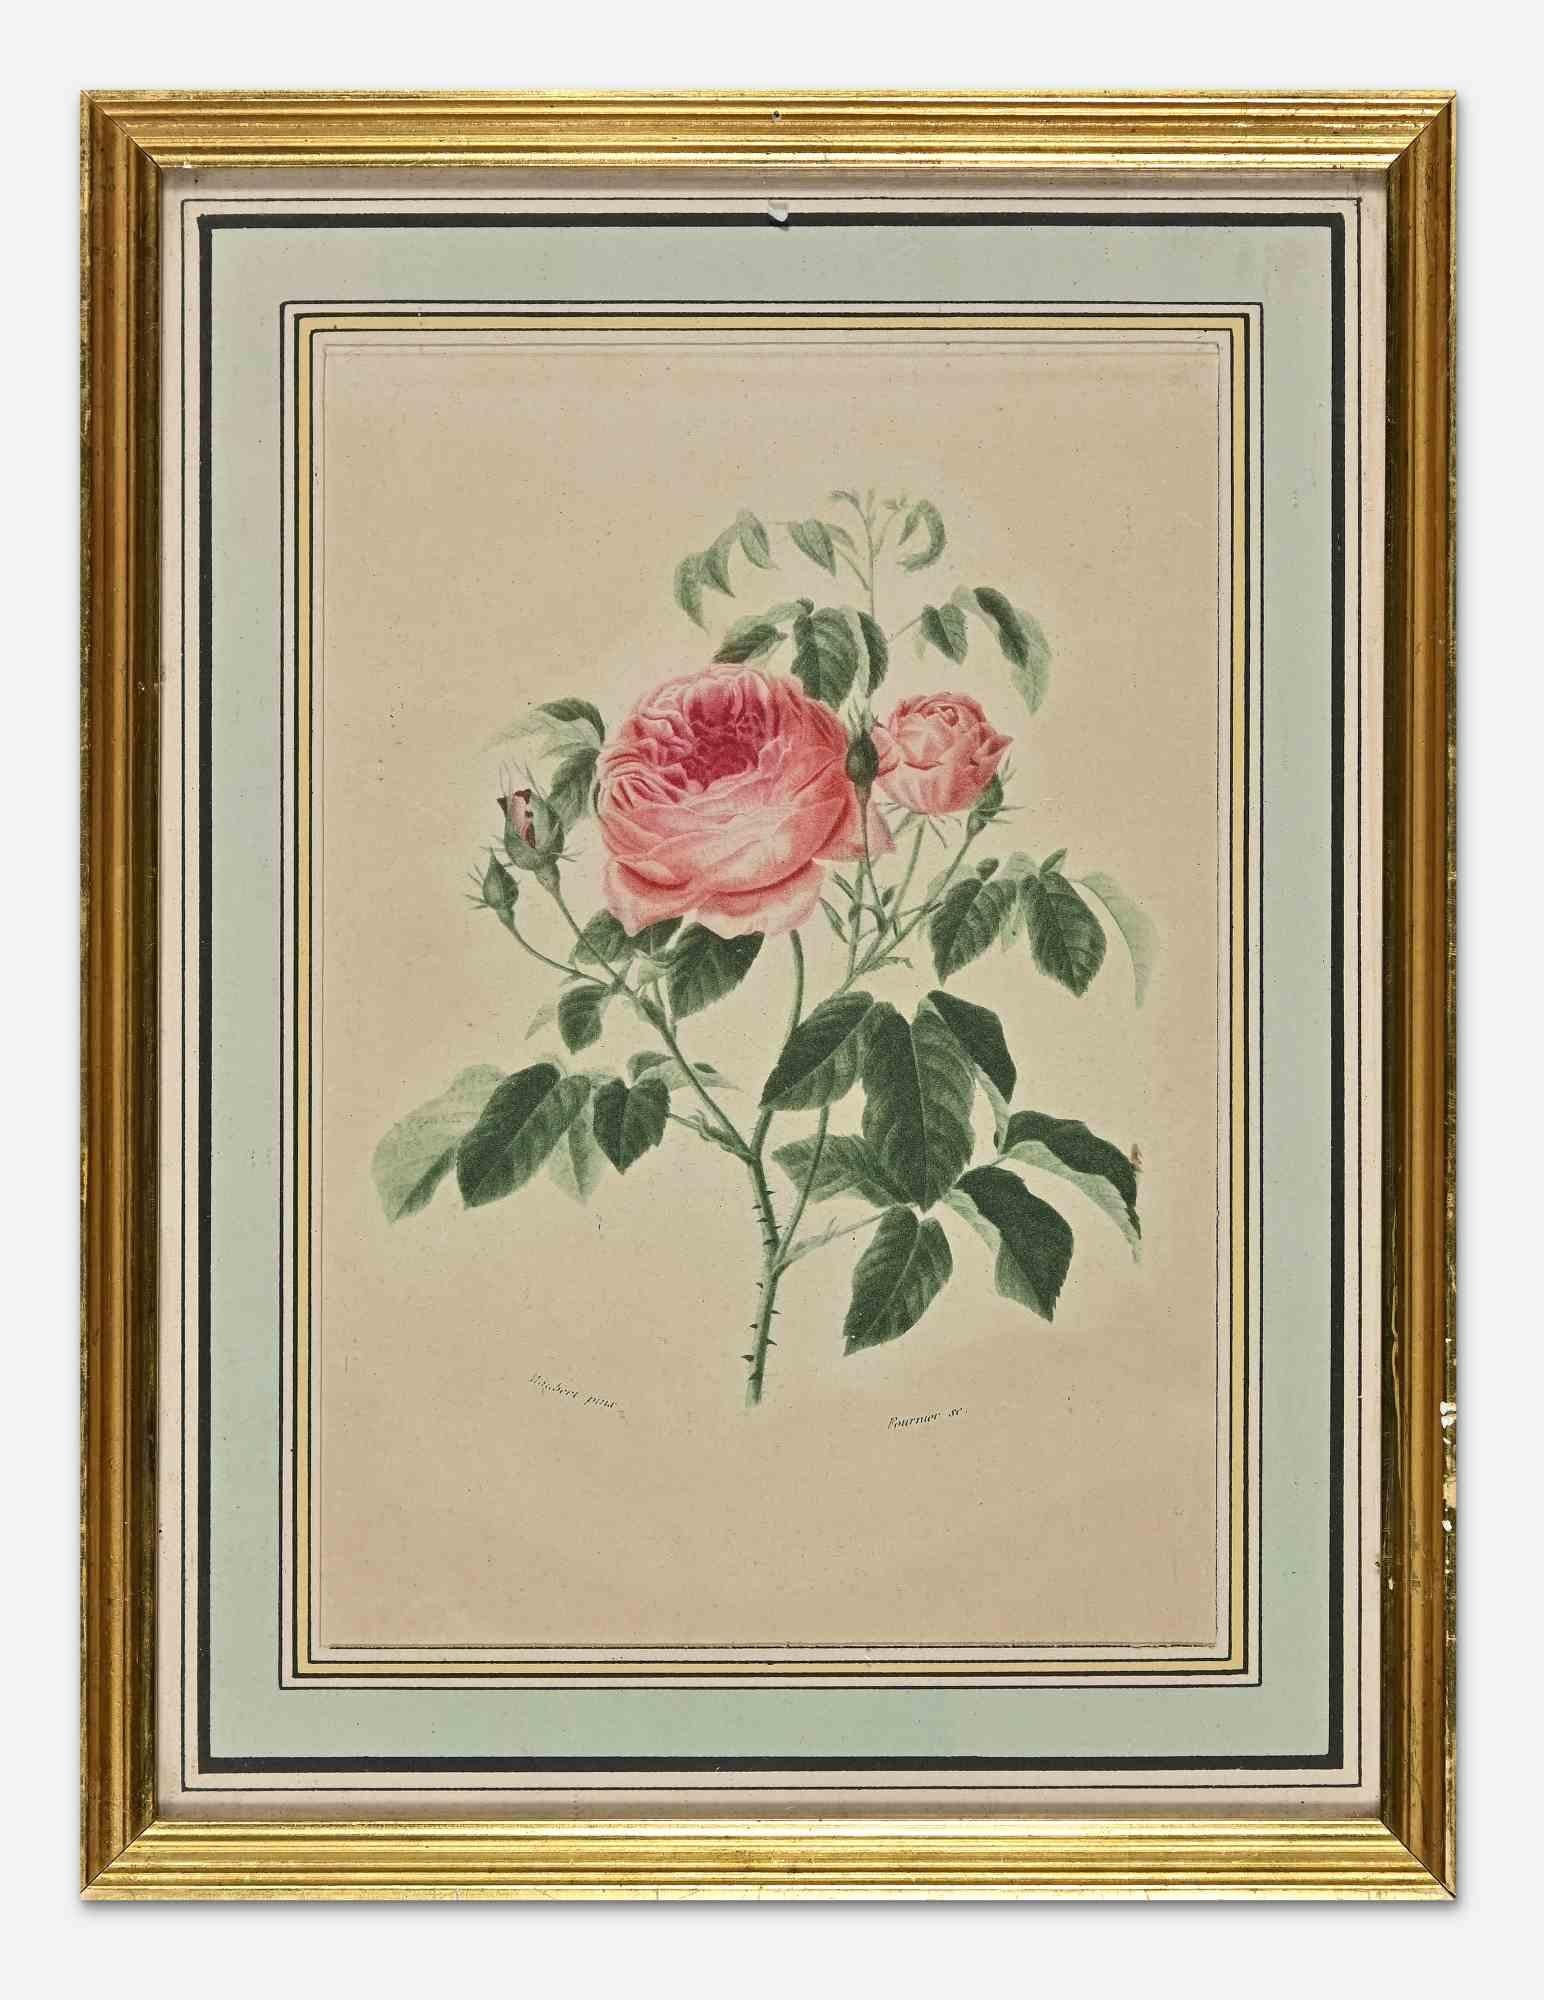 Roses - Etching - 19th century